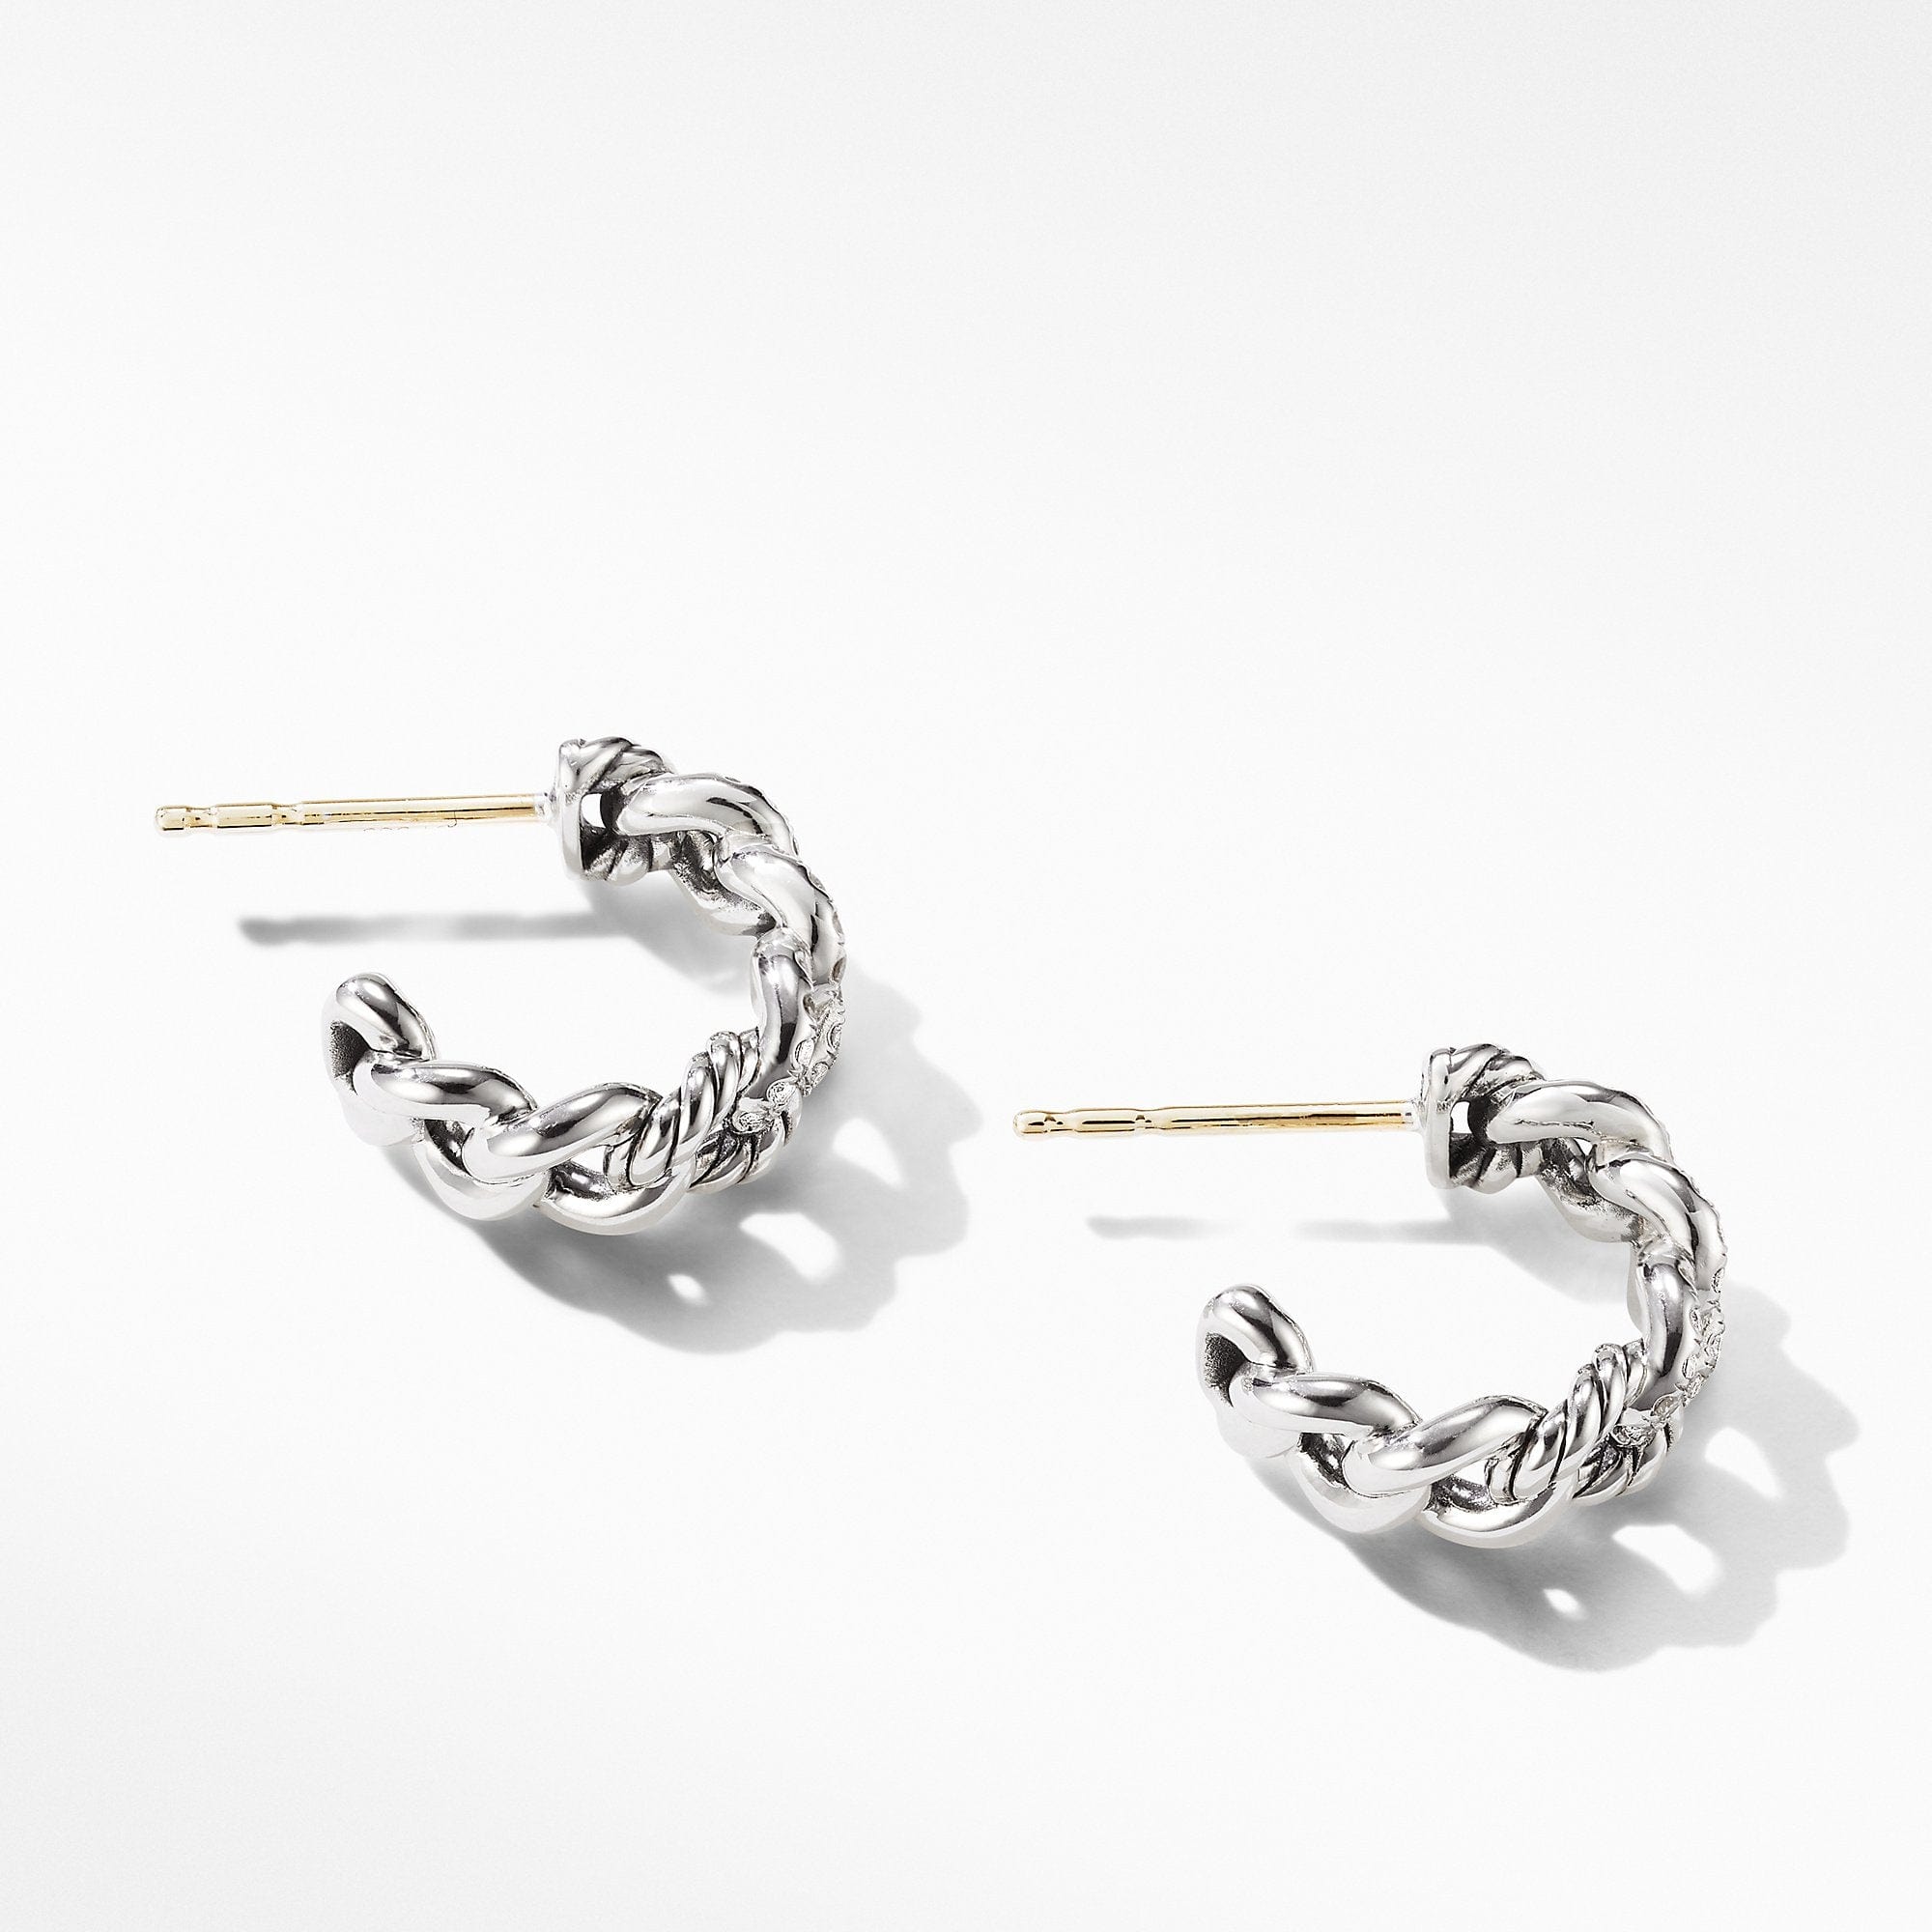 Belmont Curb Link Small Hoop Earrings with Pavé Diamonds